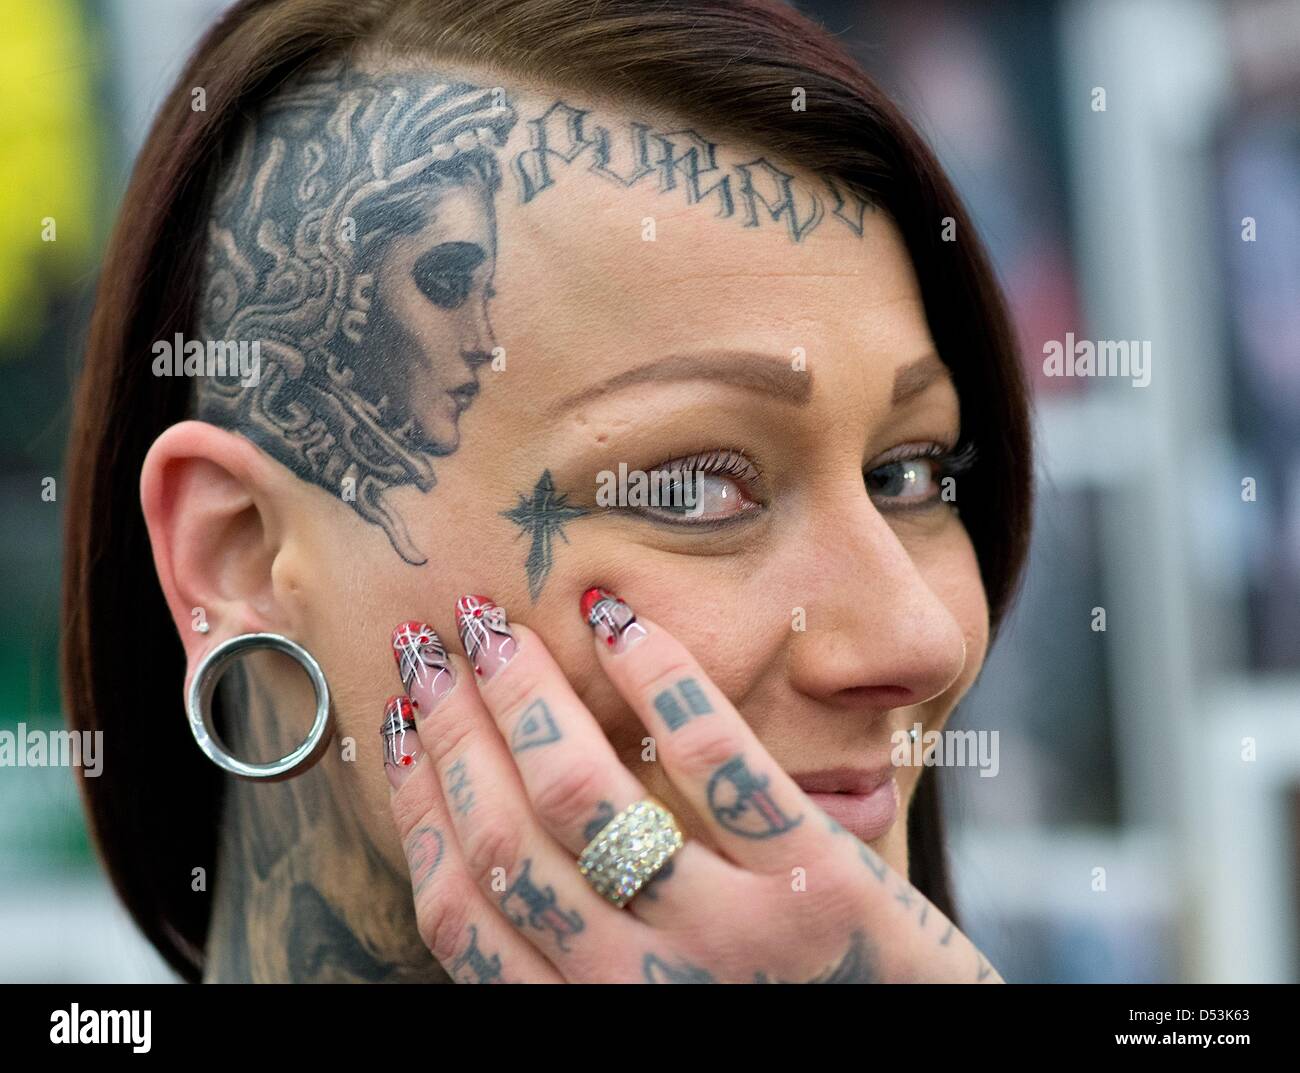 Frankfurt, Germany. 23rd March 2013. A young Dutch woman presents a tattoo  on her partly shaved head at the International tattoo Convention in  Frankfurt Main, Germany, 23 March 2013. More than 600